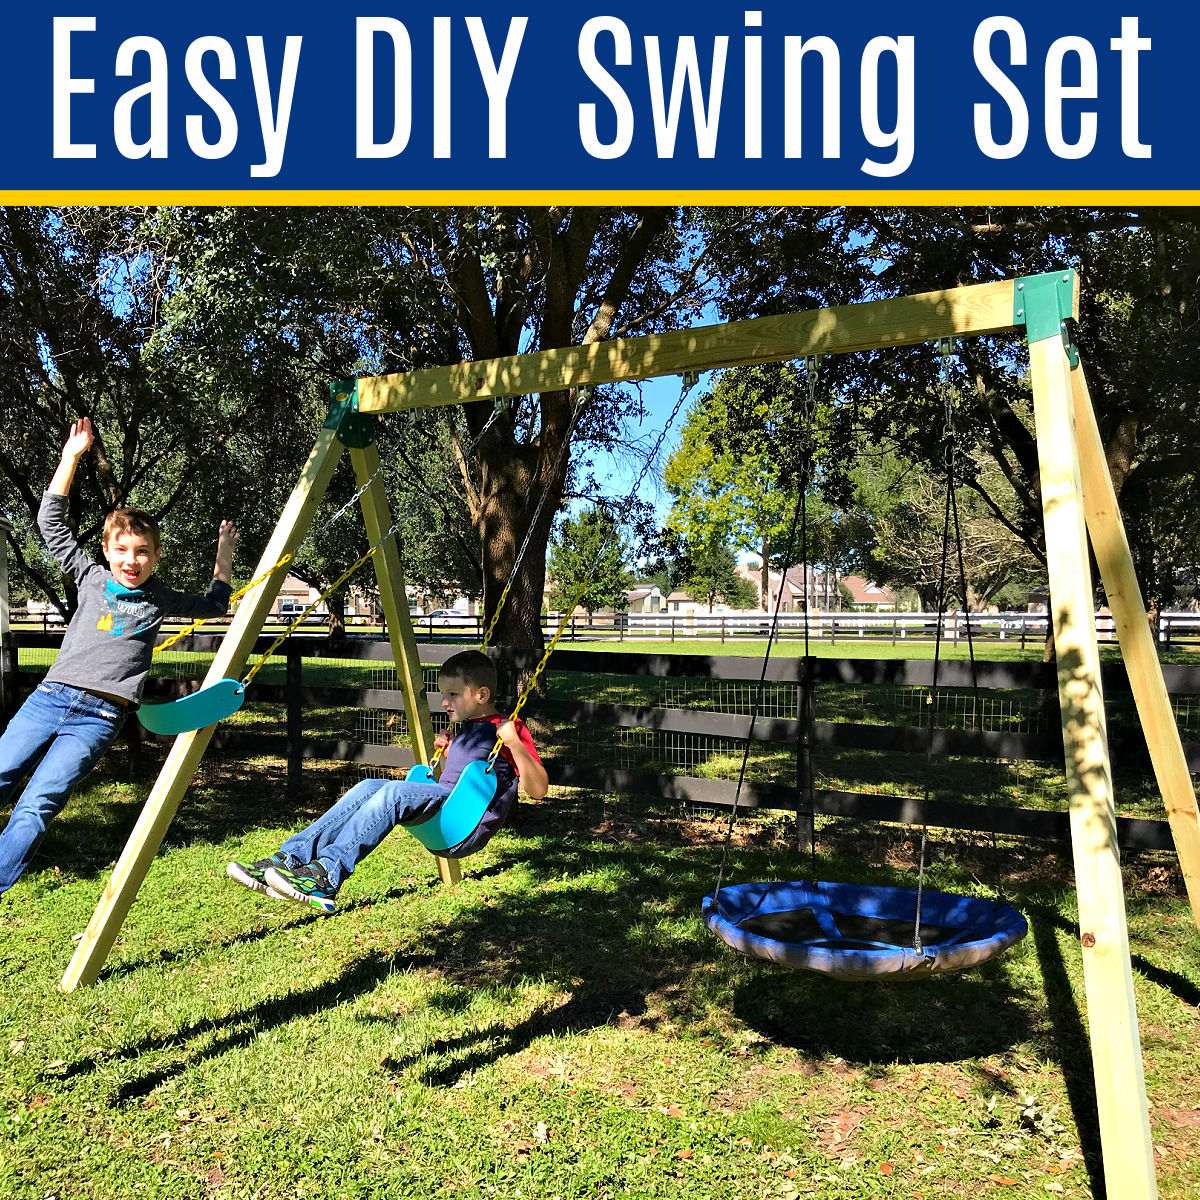 How To Build A Swing Frame From 4x4's: Quick, Cheap & Easy DIY Swing Set -  Abbotts At Home